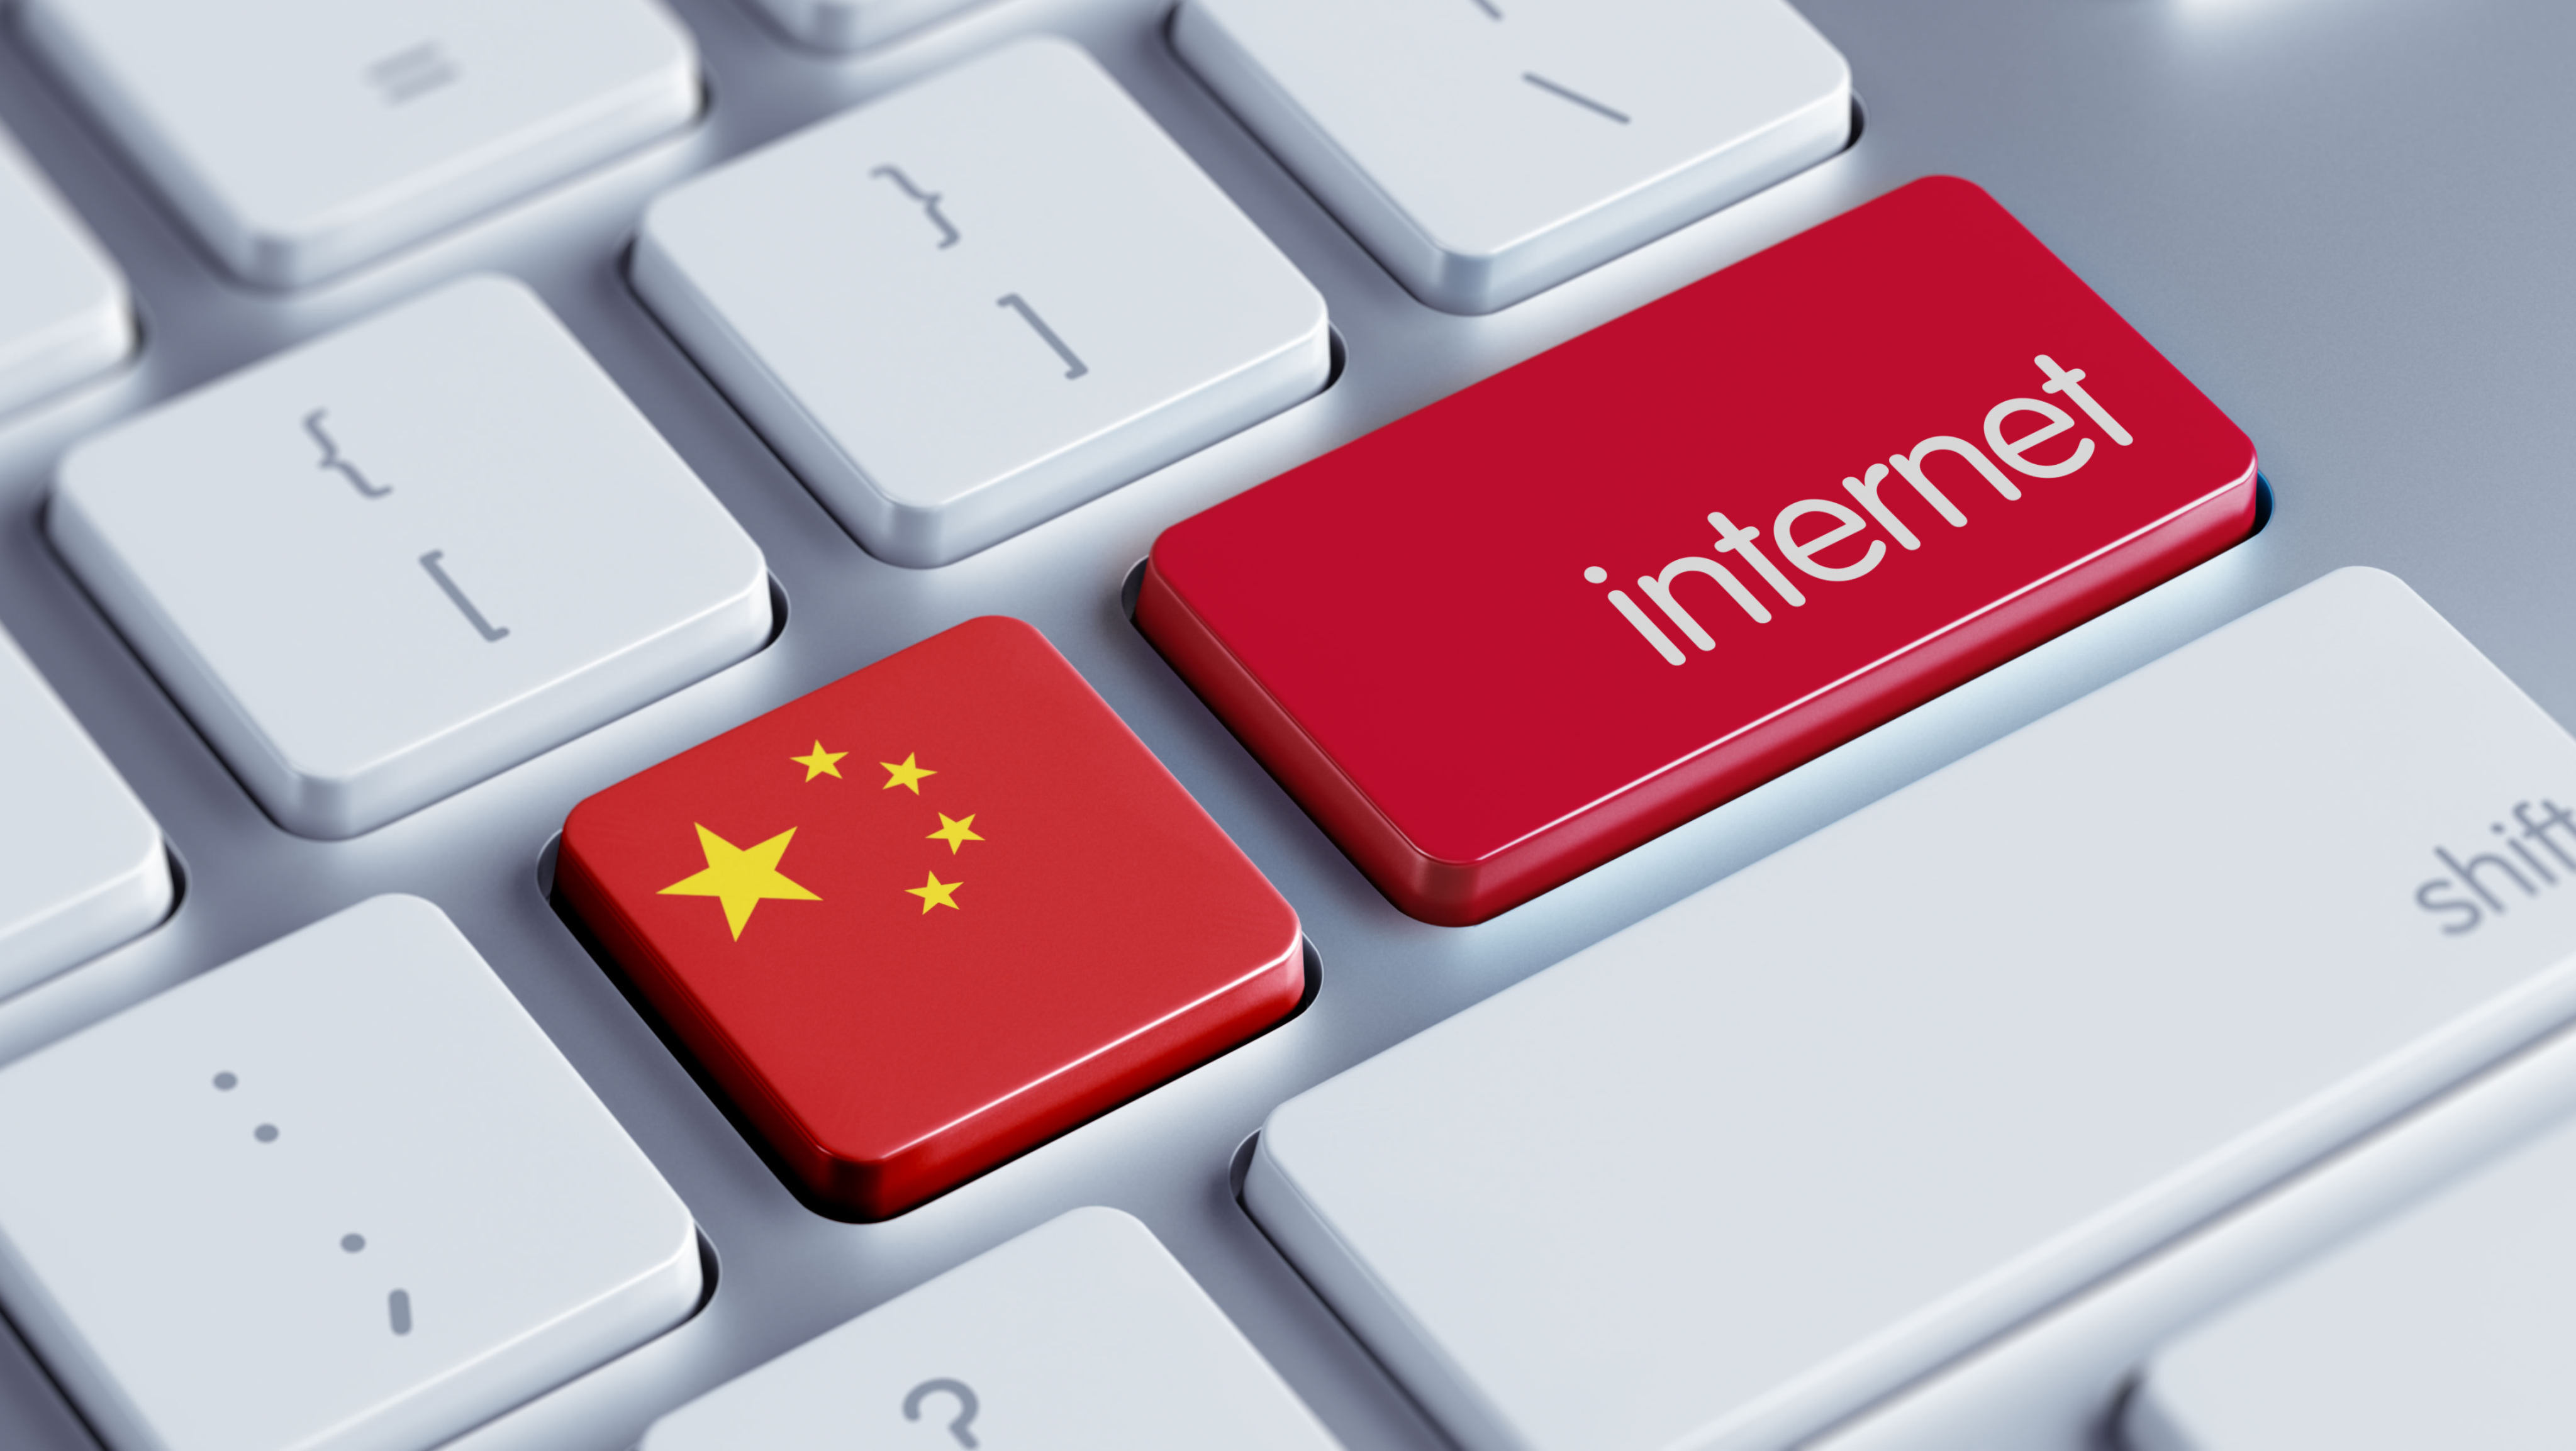 China had 1.08 billion internet users as of June, an increase of 11.09 million from December last year, to put the nation’s online penetration rate at 76.4 per cent. Image: Shutterstock